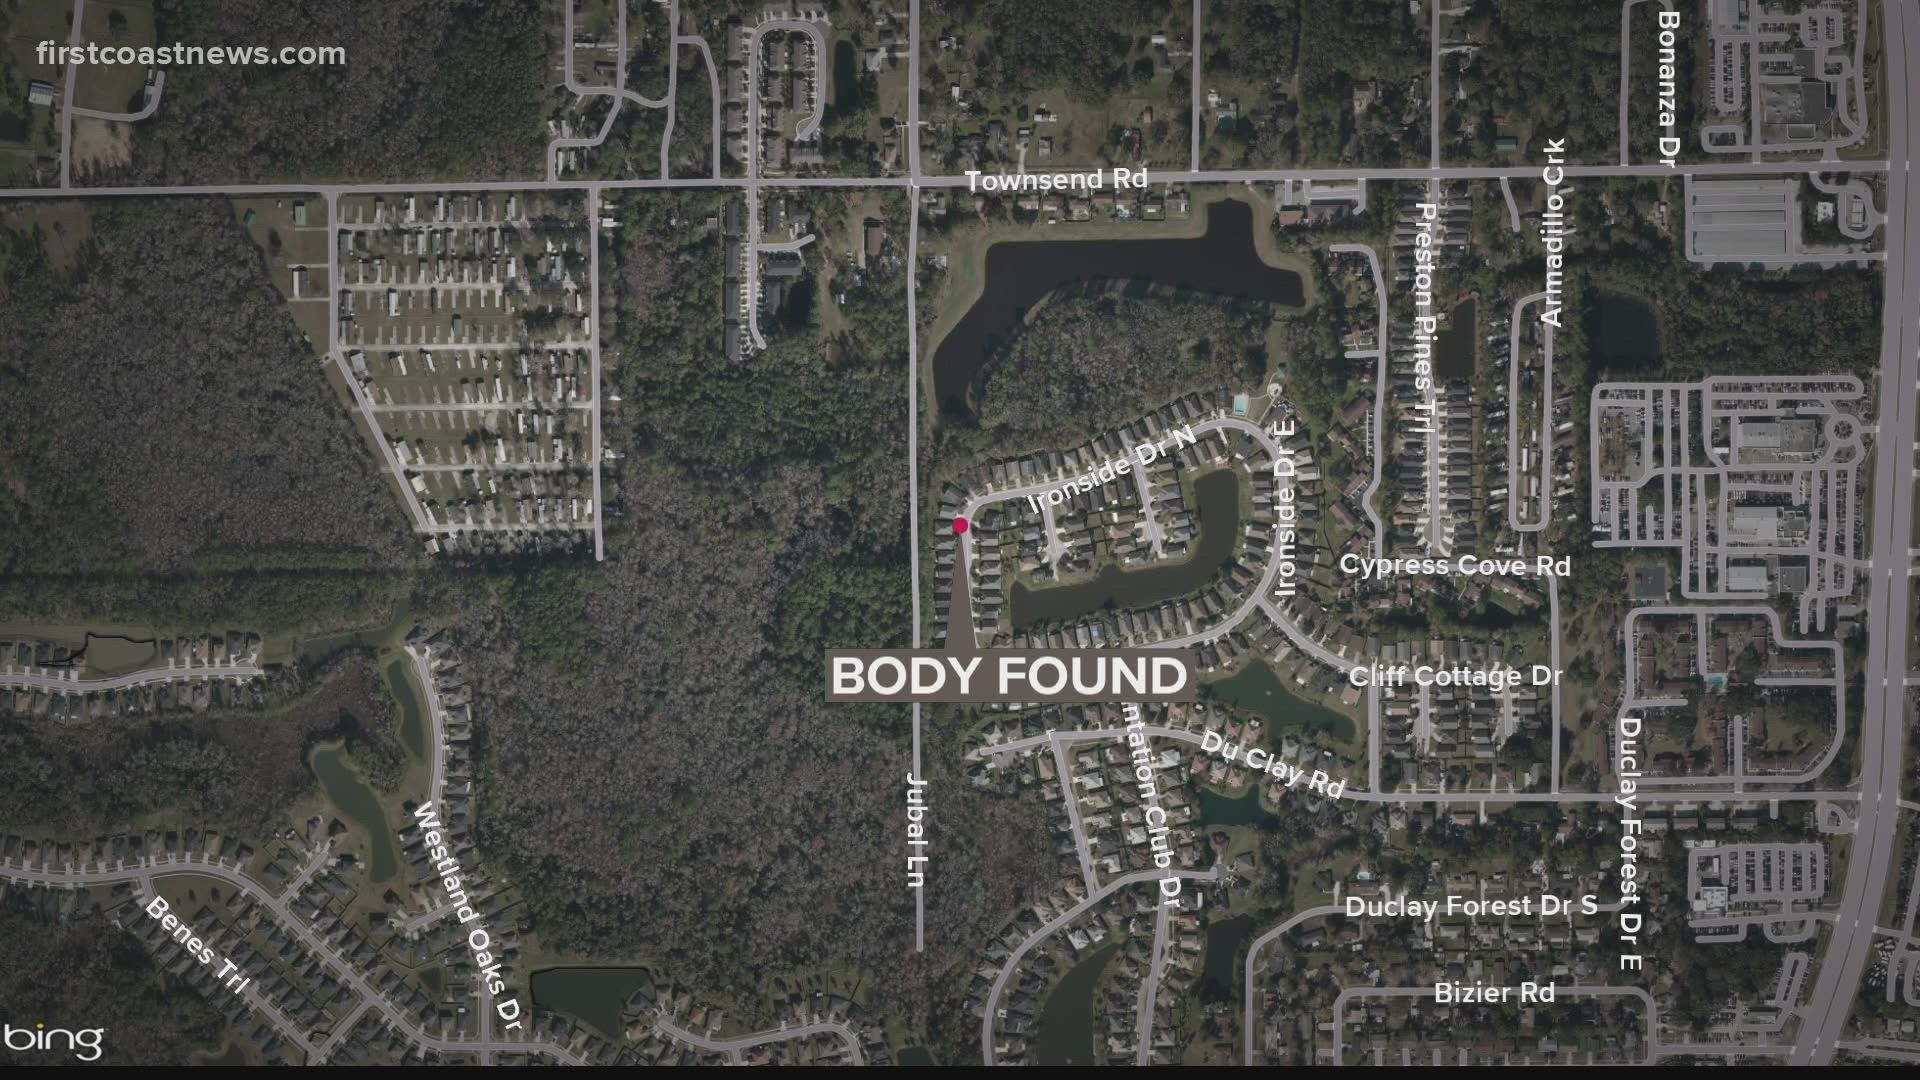 JSO said the man was found dead from a gunshot wound in the 7300 block of Ironside Drive around 9:21 a.m.